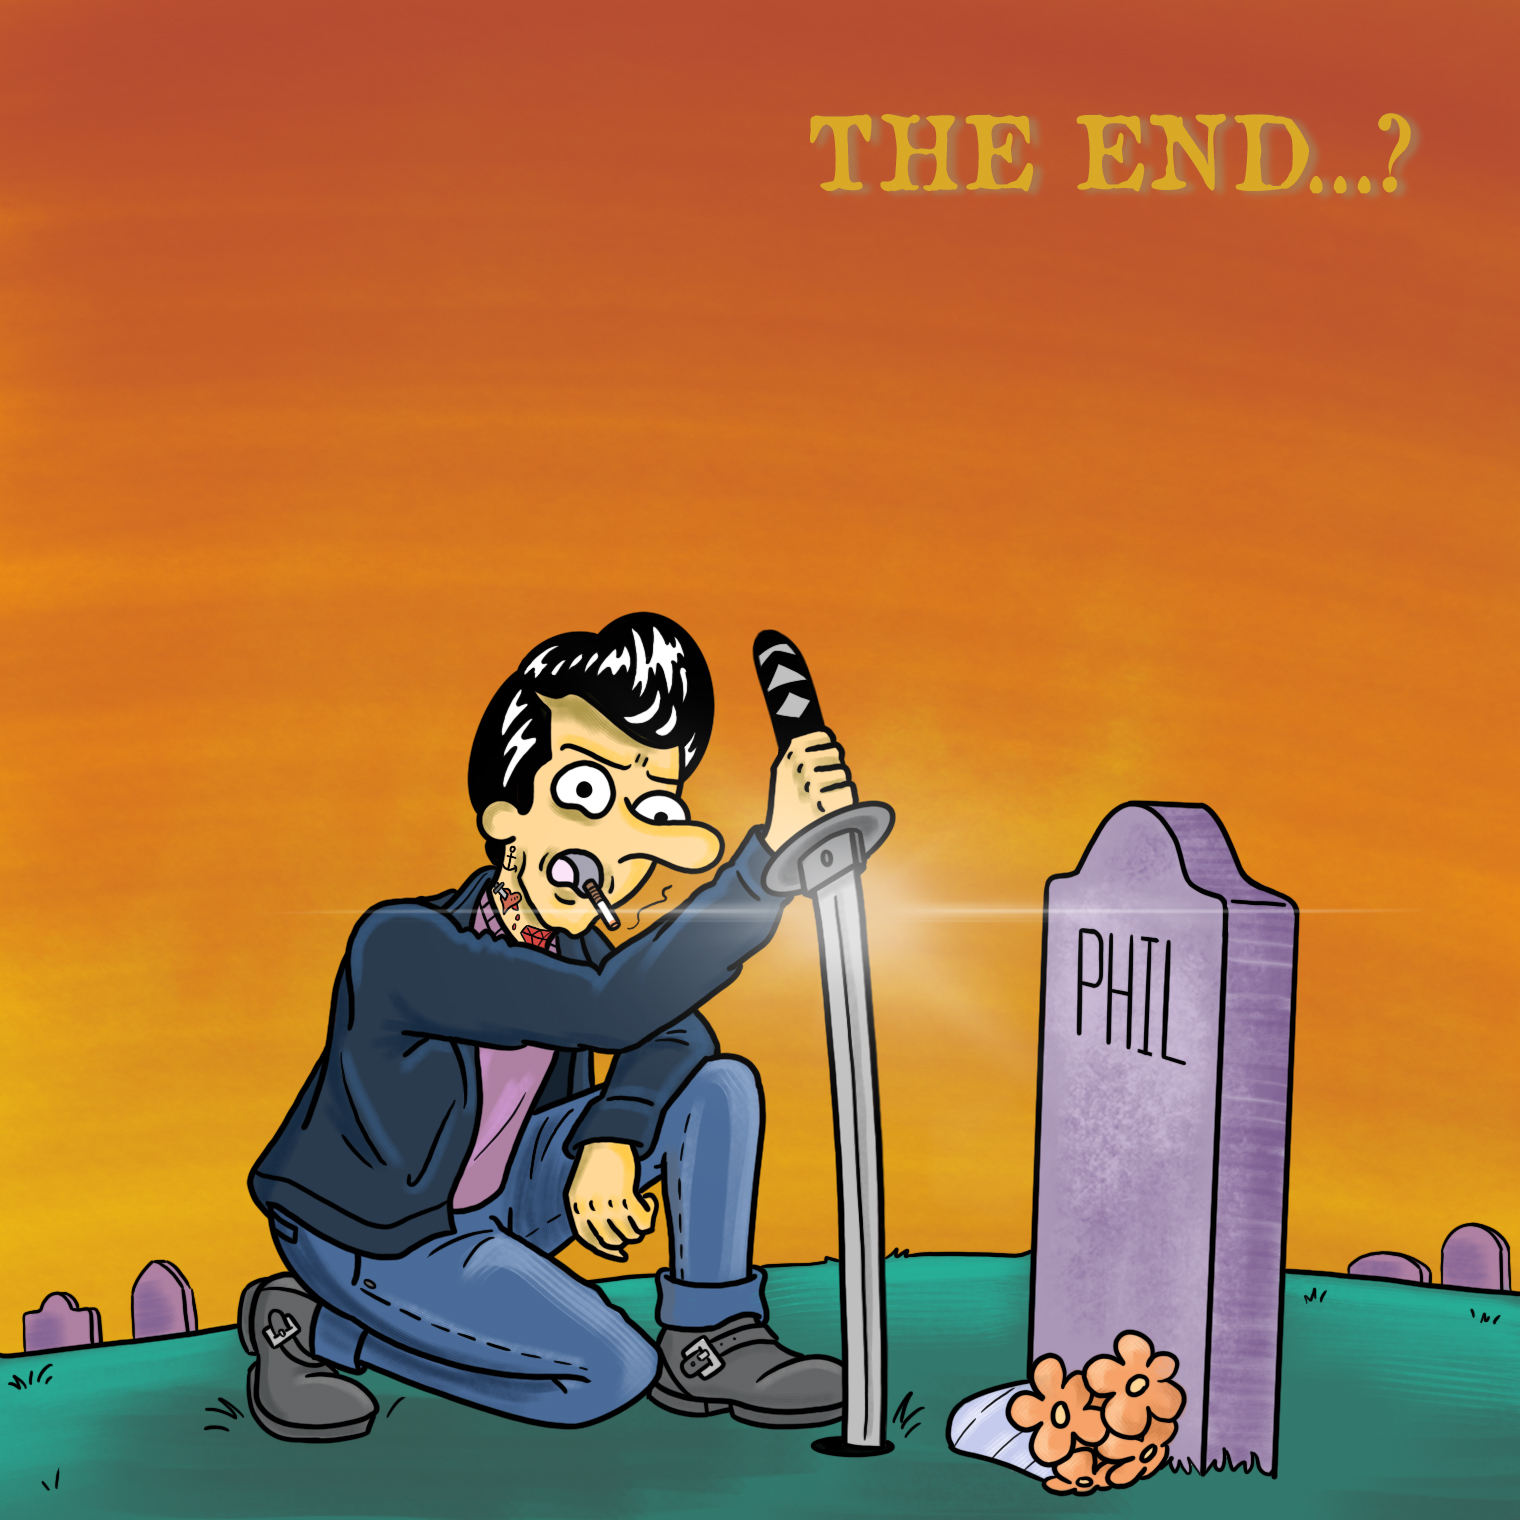 The End?